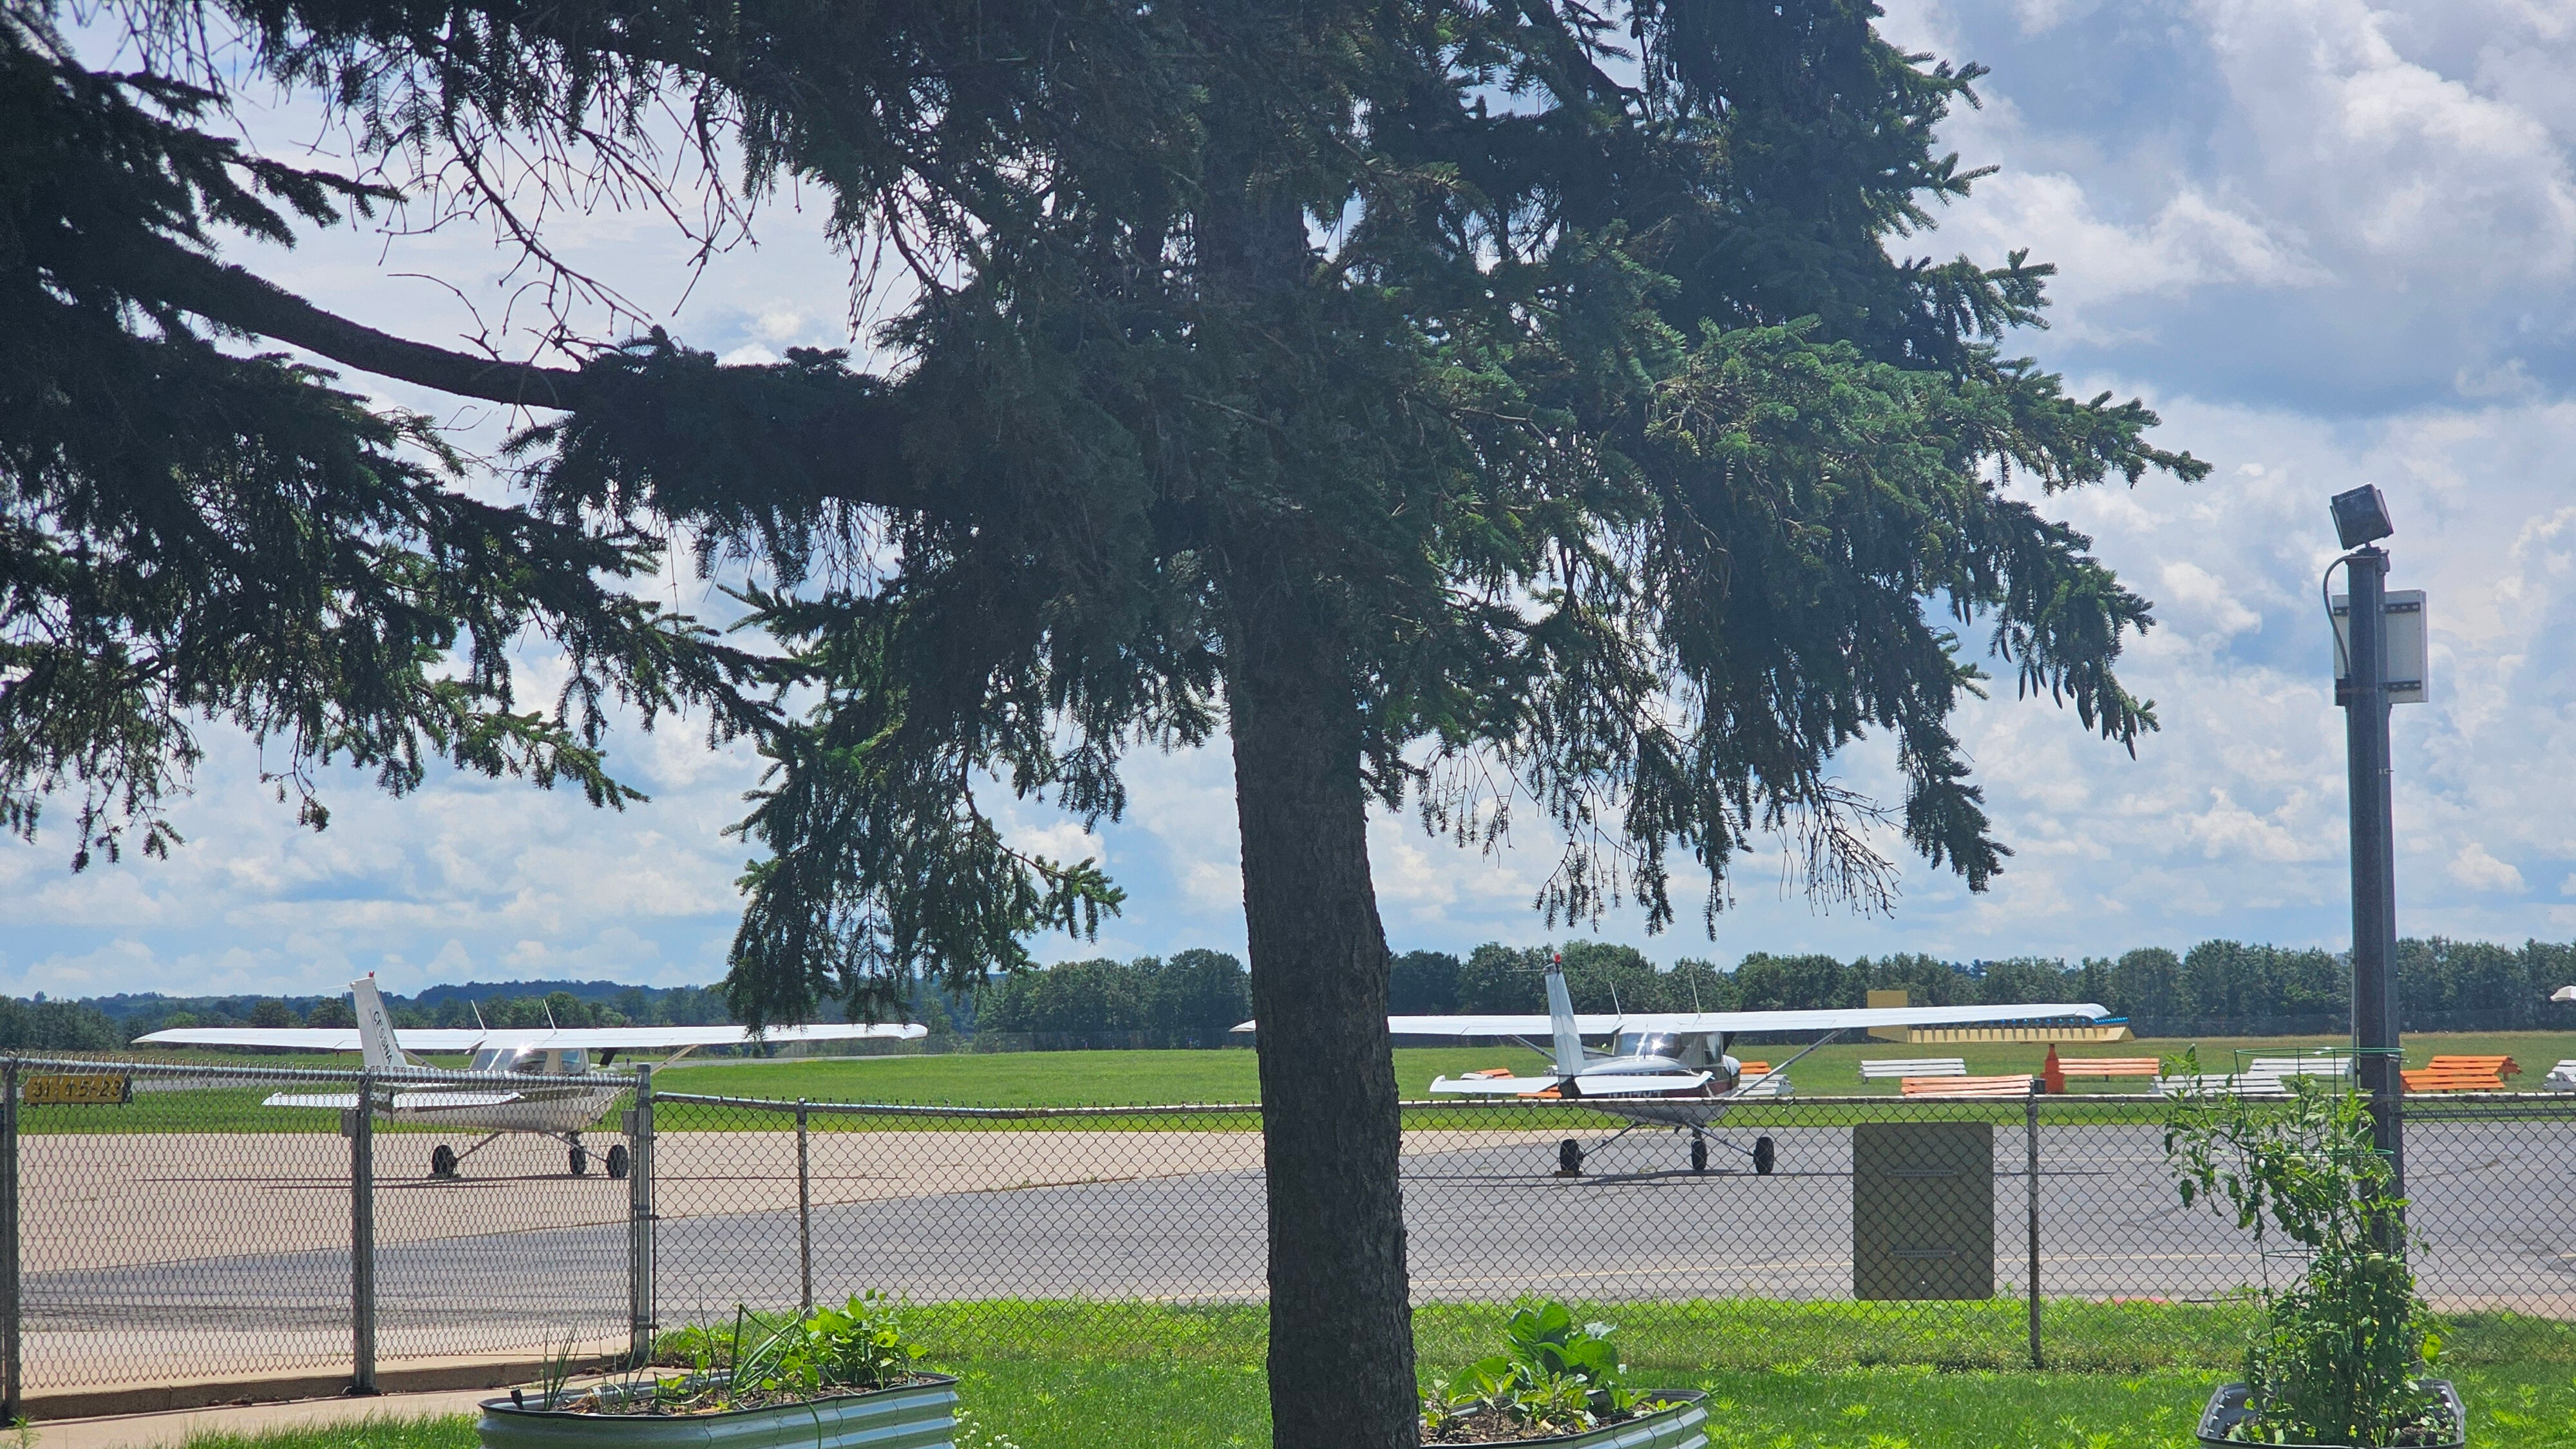 The FAA puts their foot down, Wausau Downtown Airport struggles for repair